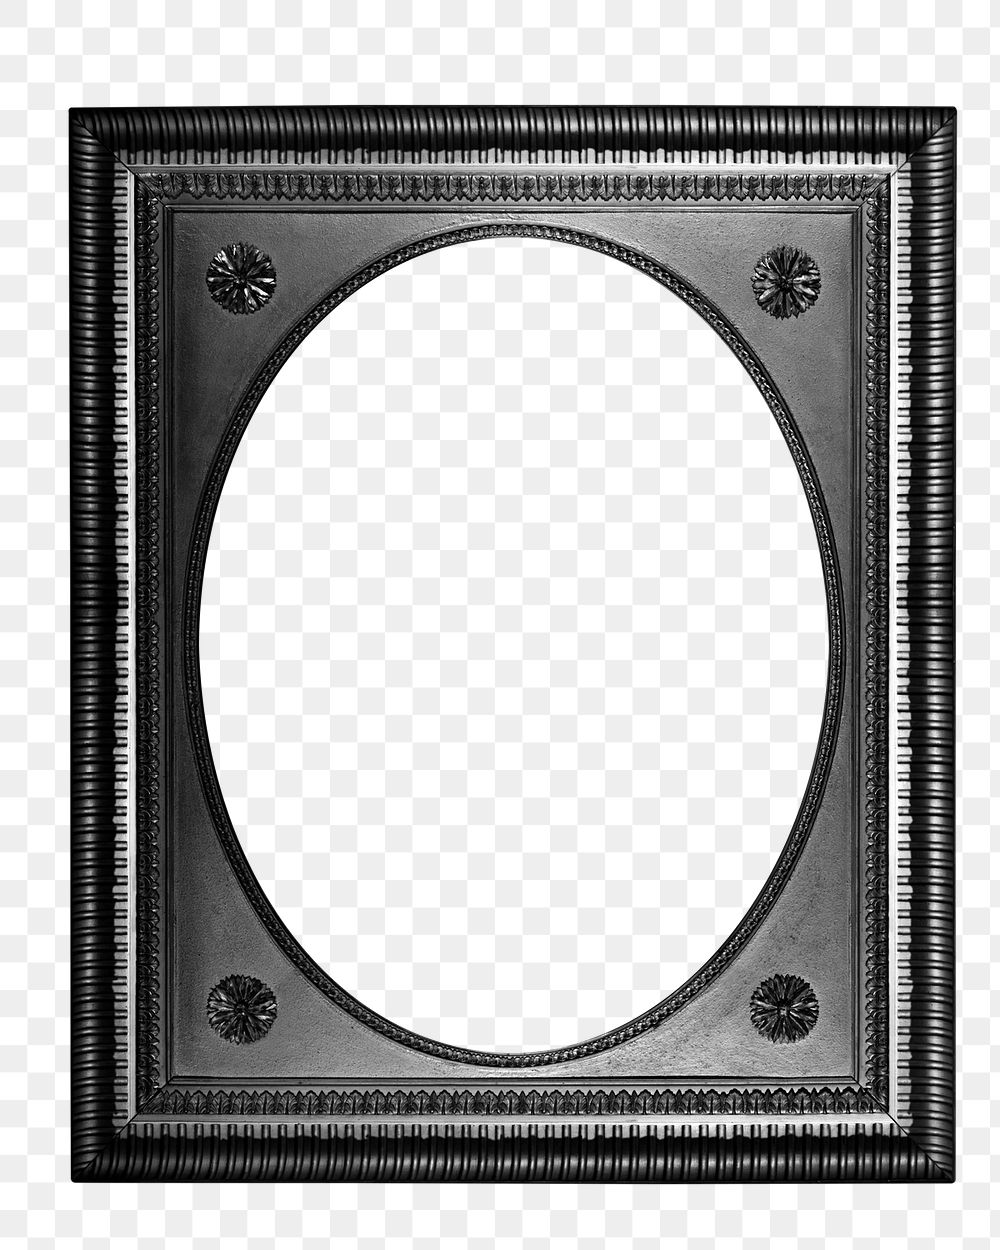 Frame mockup PNG sticker in black Gothic style